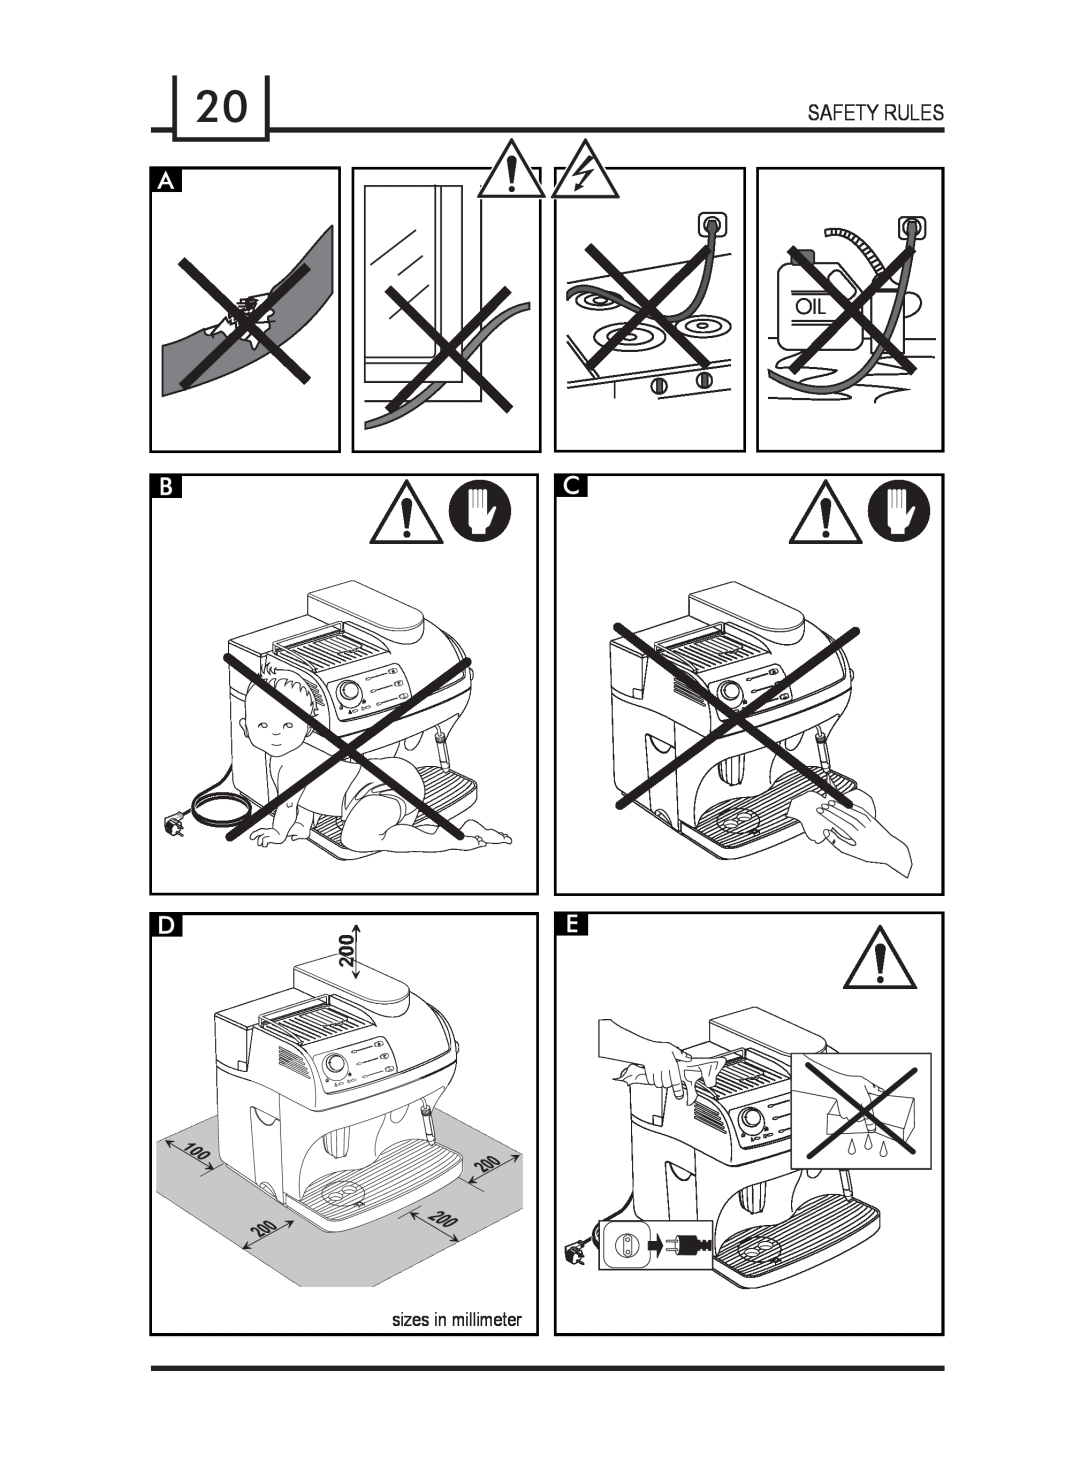 Gaggia 740903008 manual Safety Rules, sizes in millimeter 